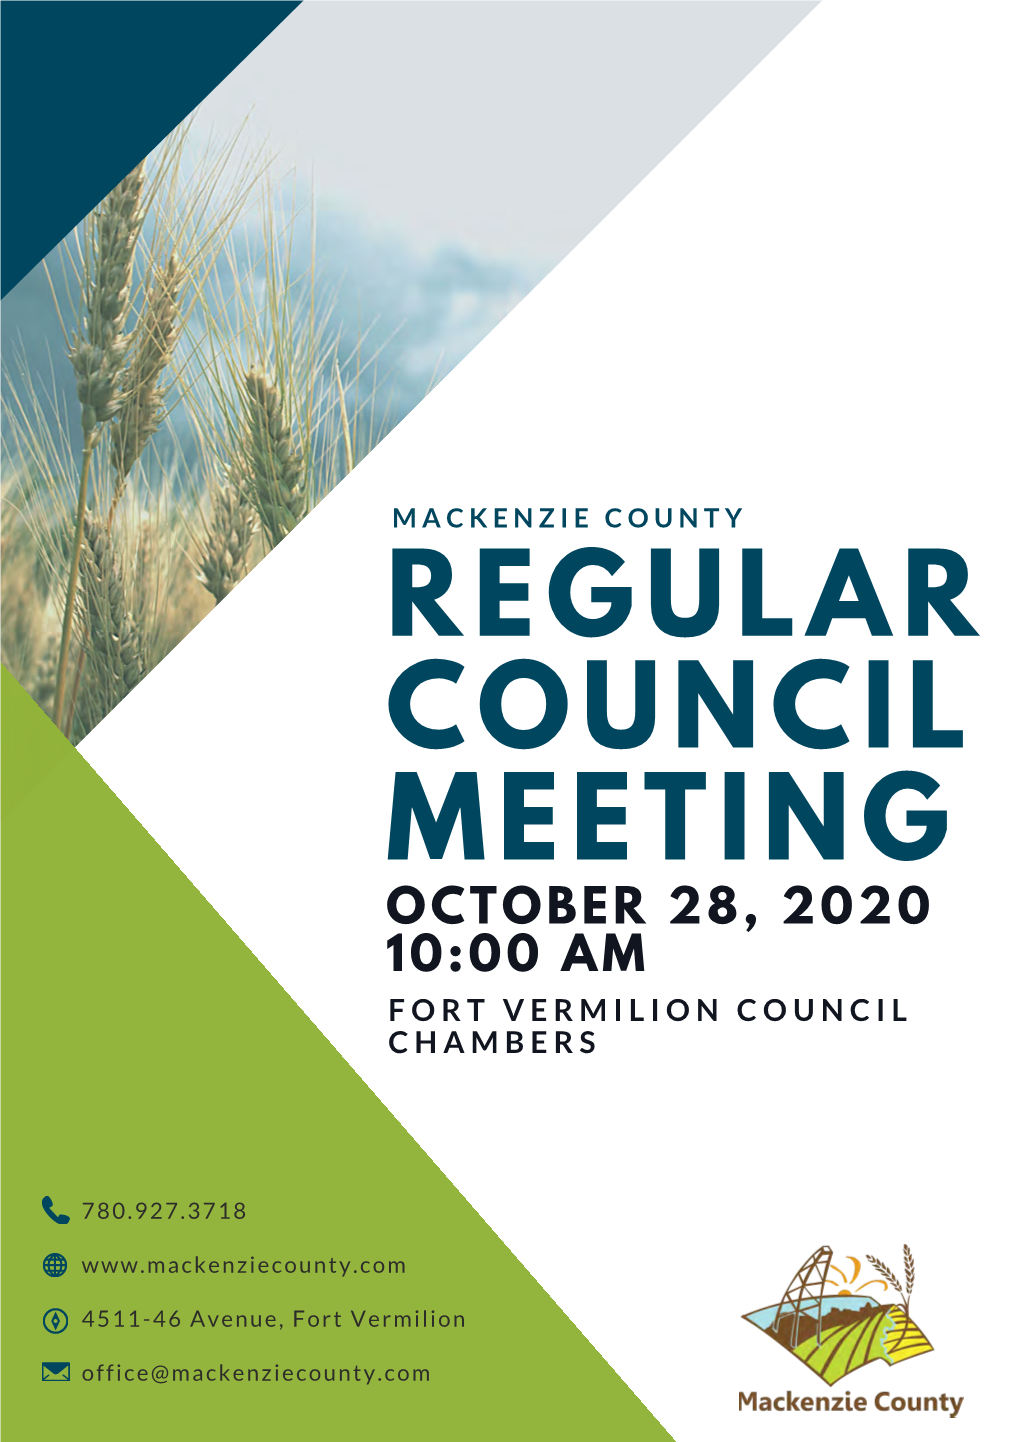 Regular Council Meeting October 28, 2020 10:00 Am Fort Vermilion Council Chambers